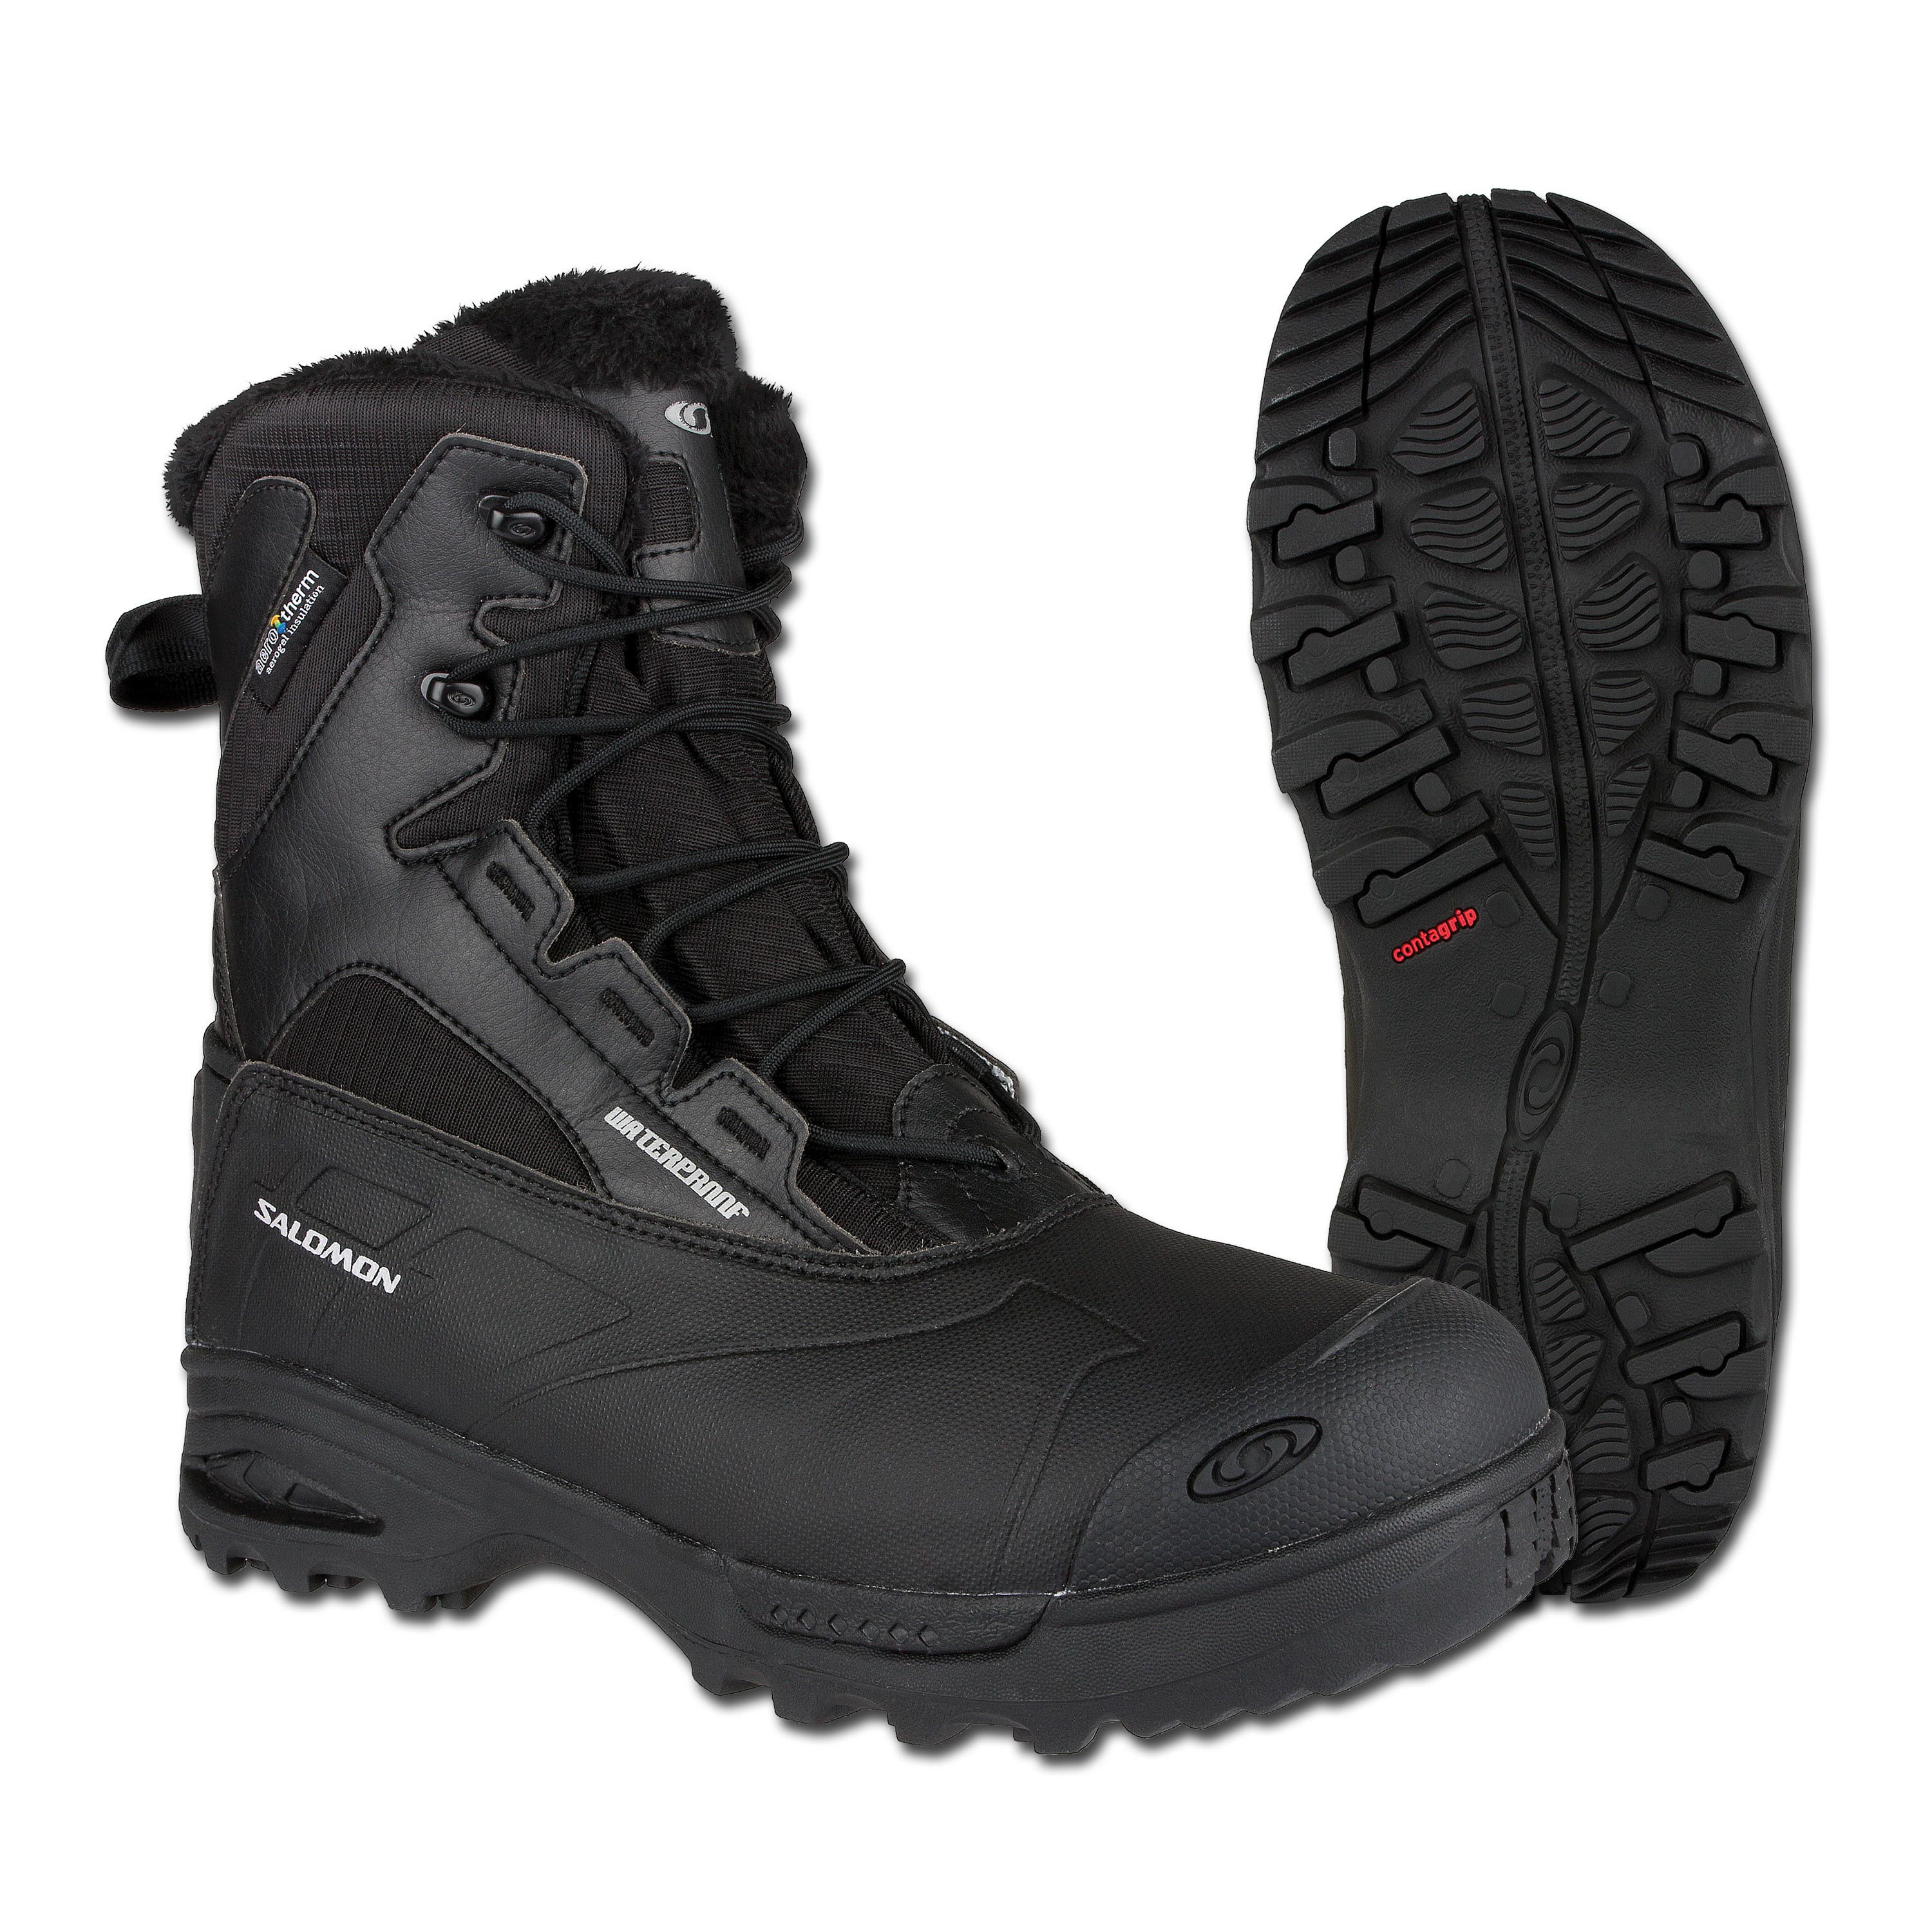 Boots Salomon Toundra MID WP | Winter Boots Salomon WP | Other Boots | Boots Footwear | Clothing